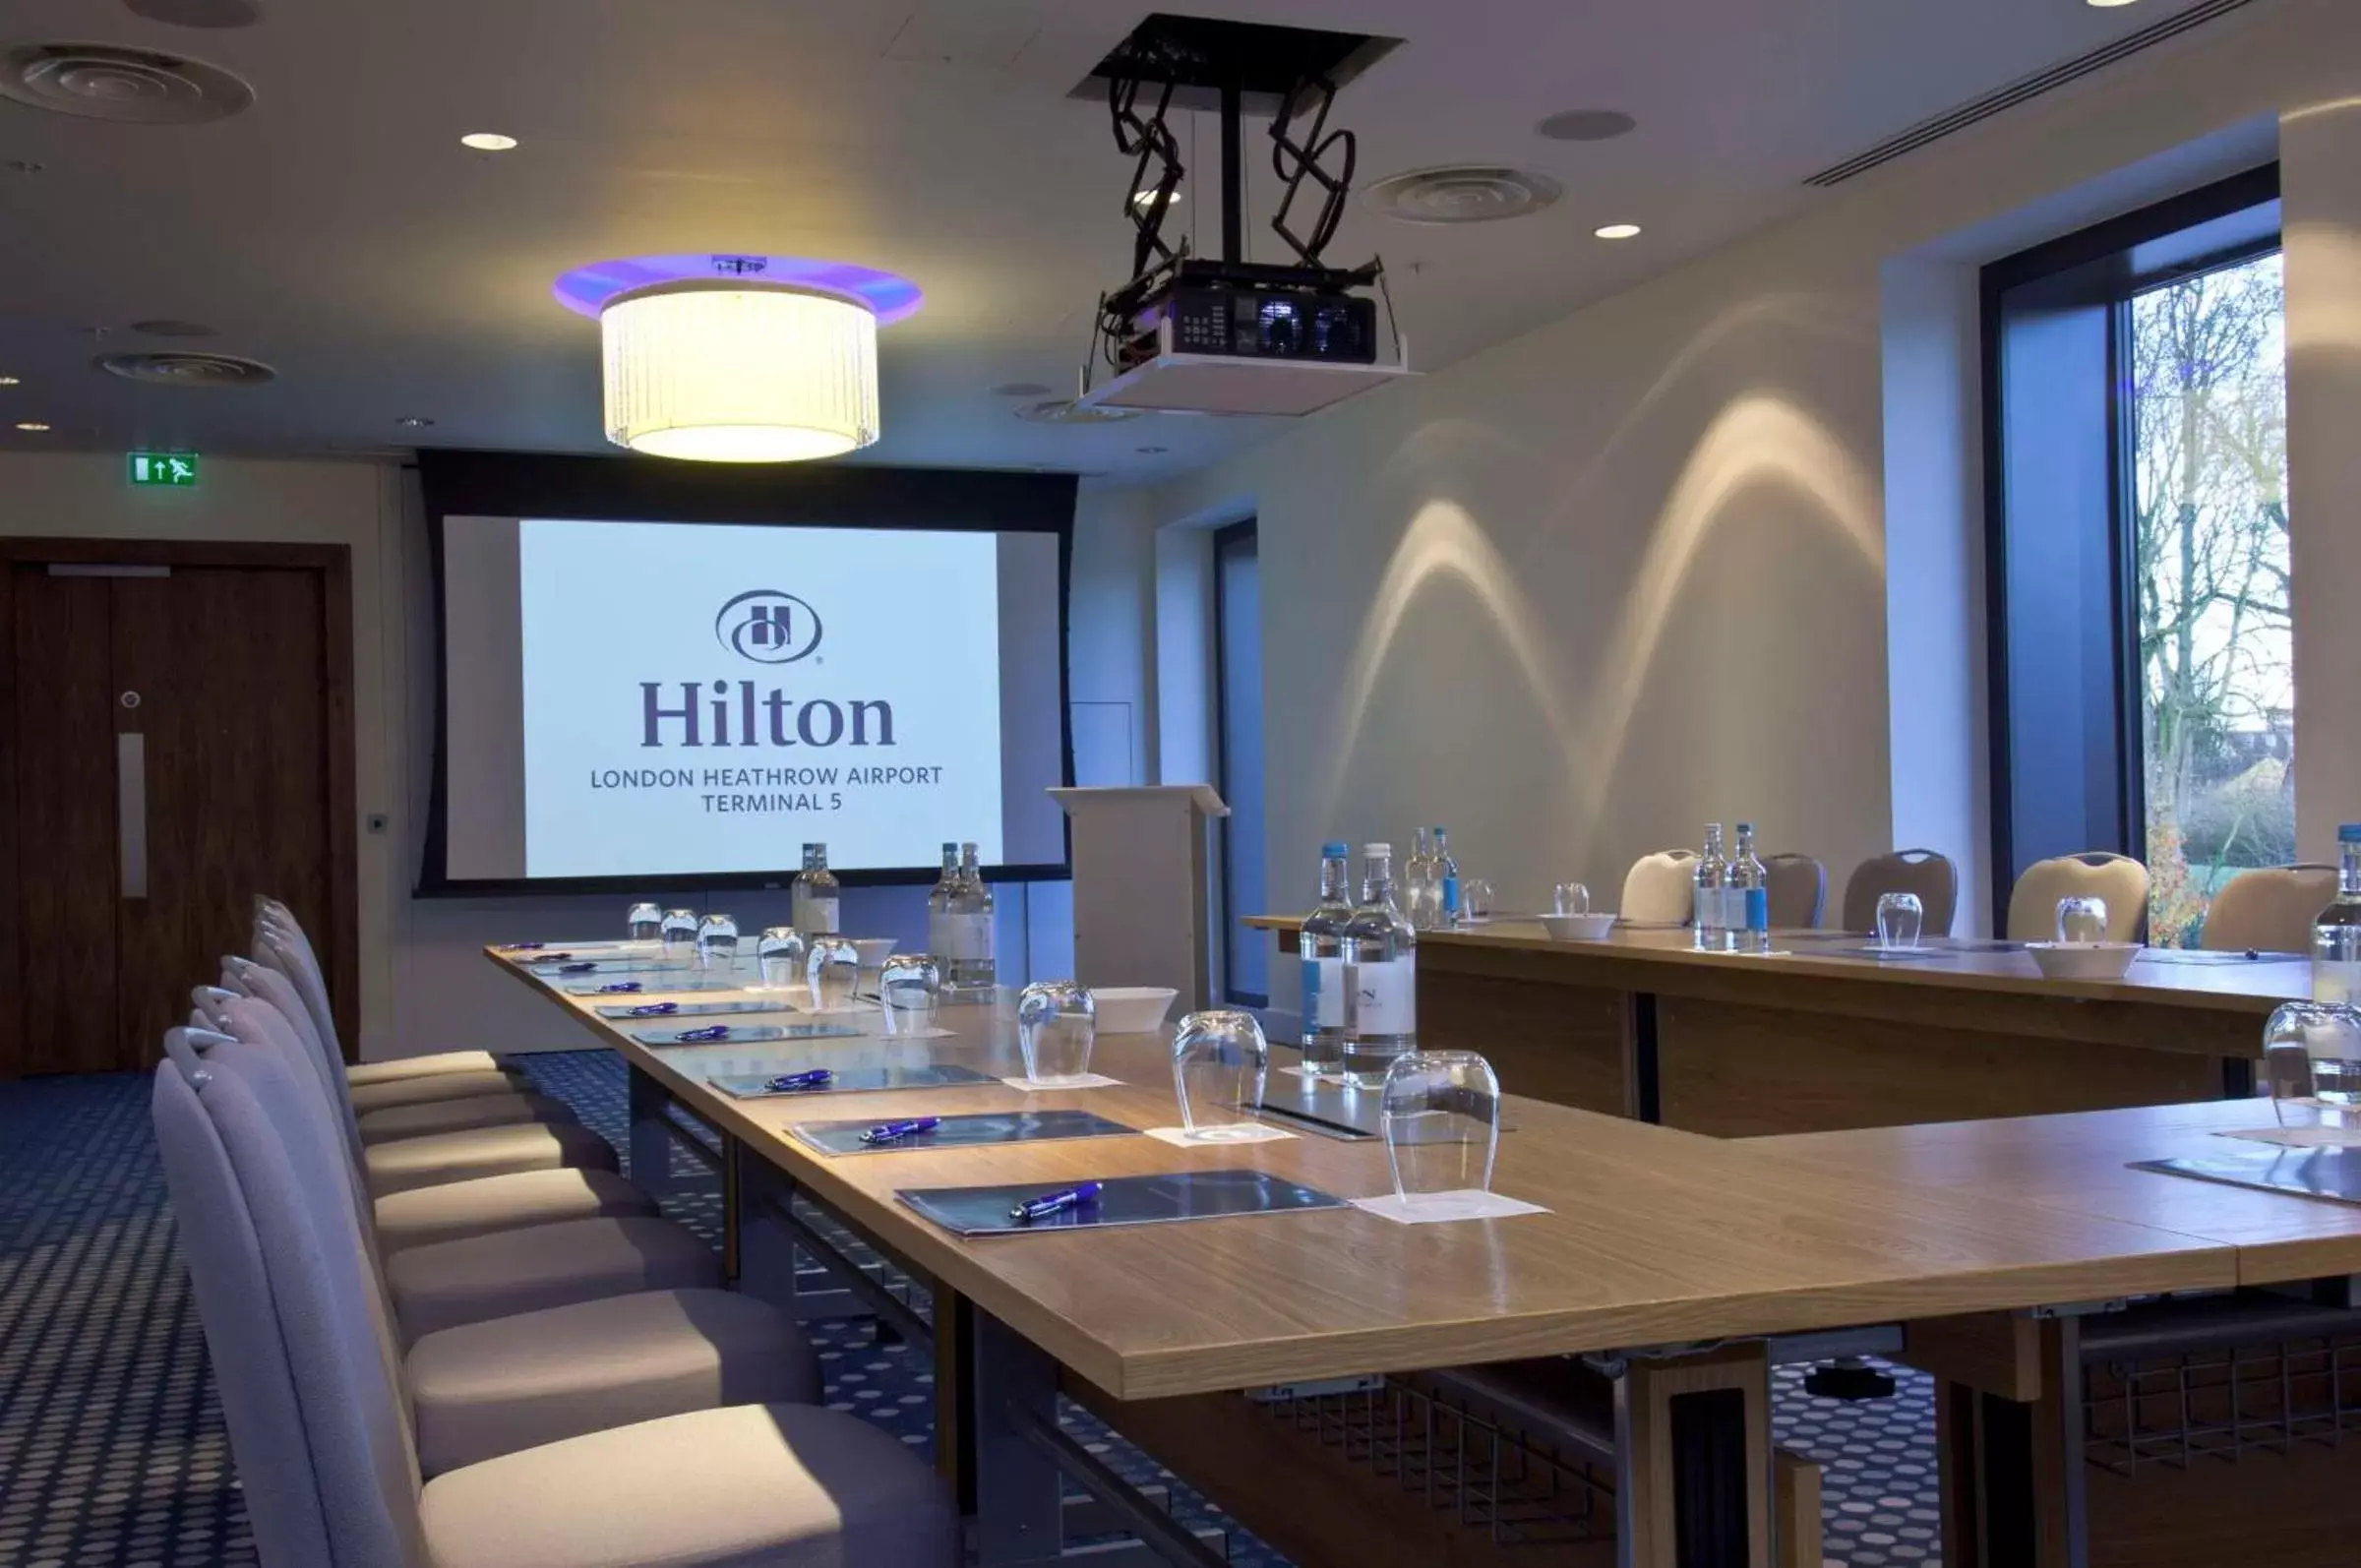 Meeting/conference room in Hilton London Heathrow Airport Terminal 5